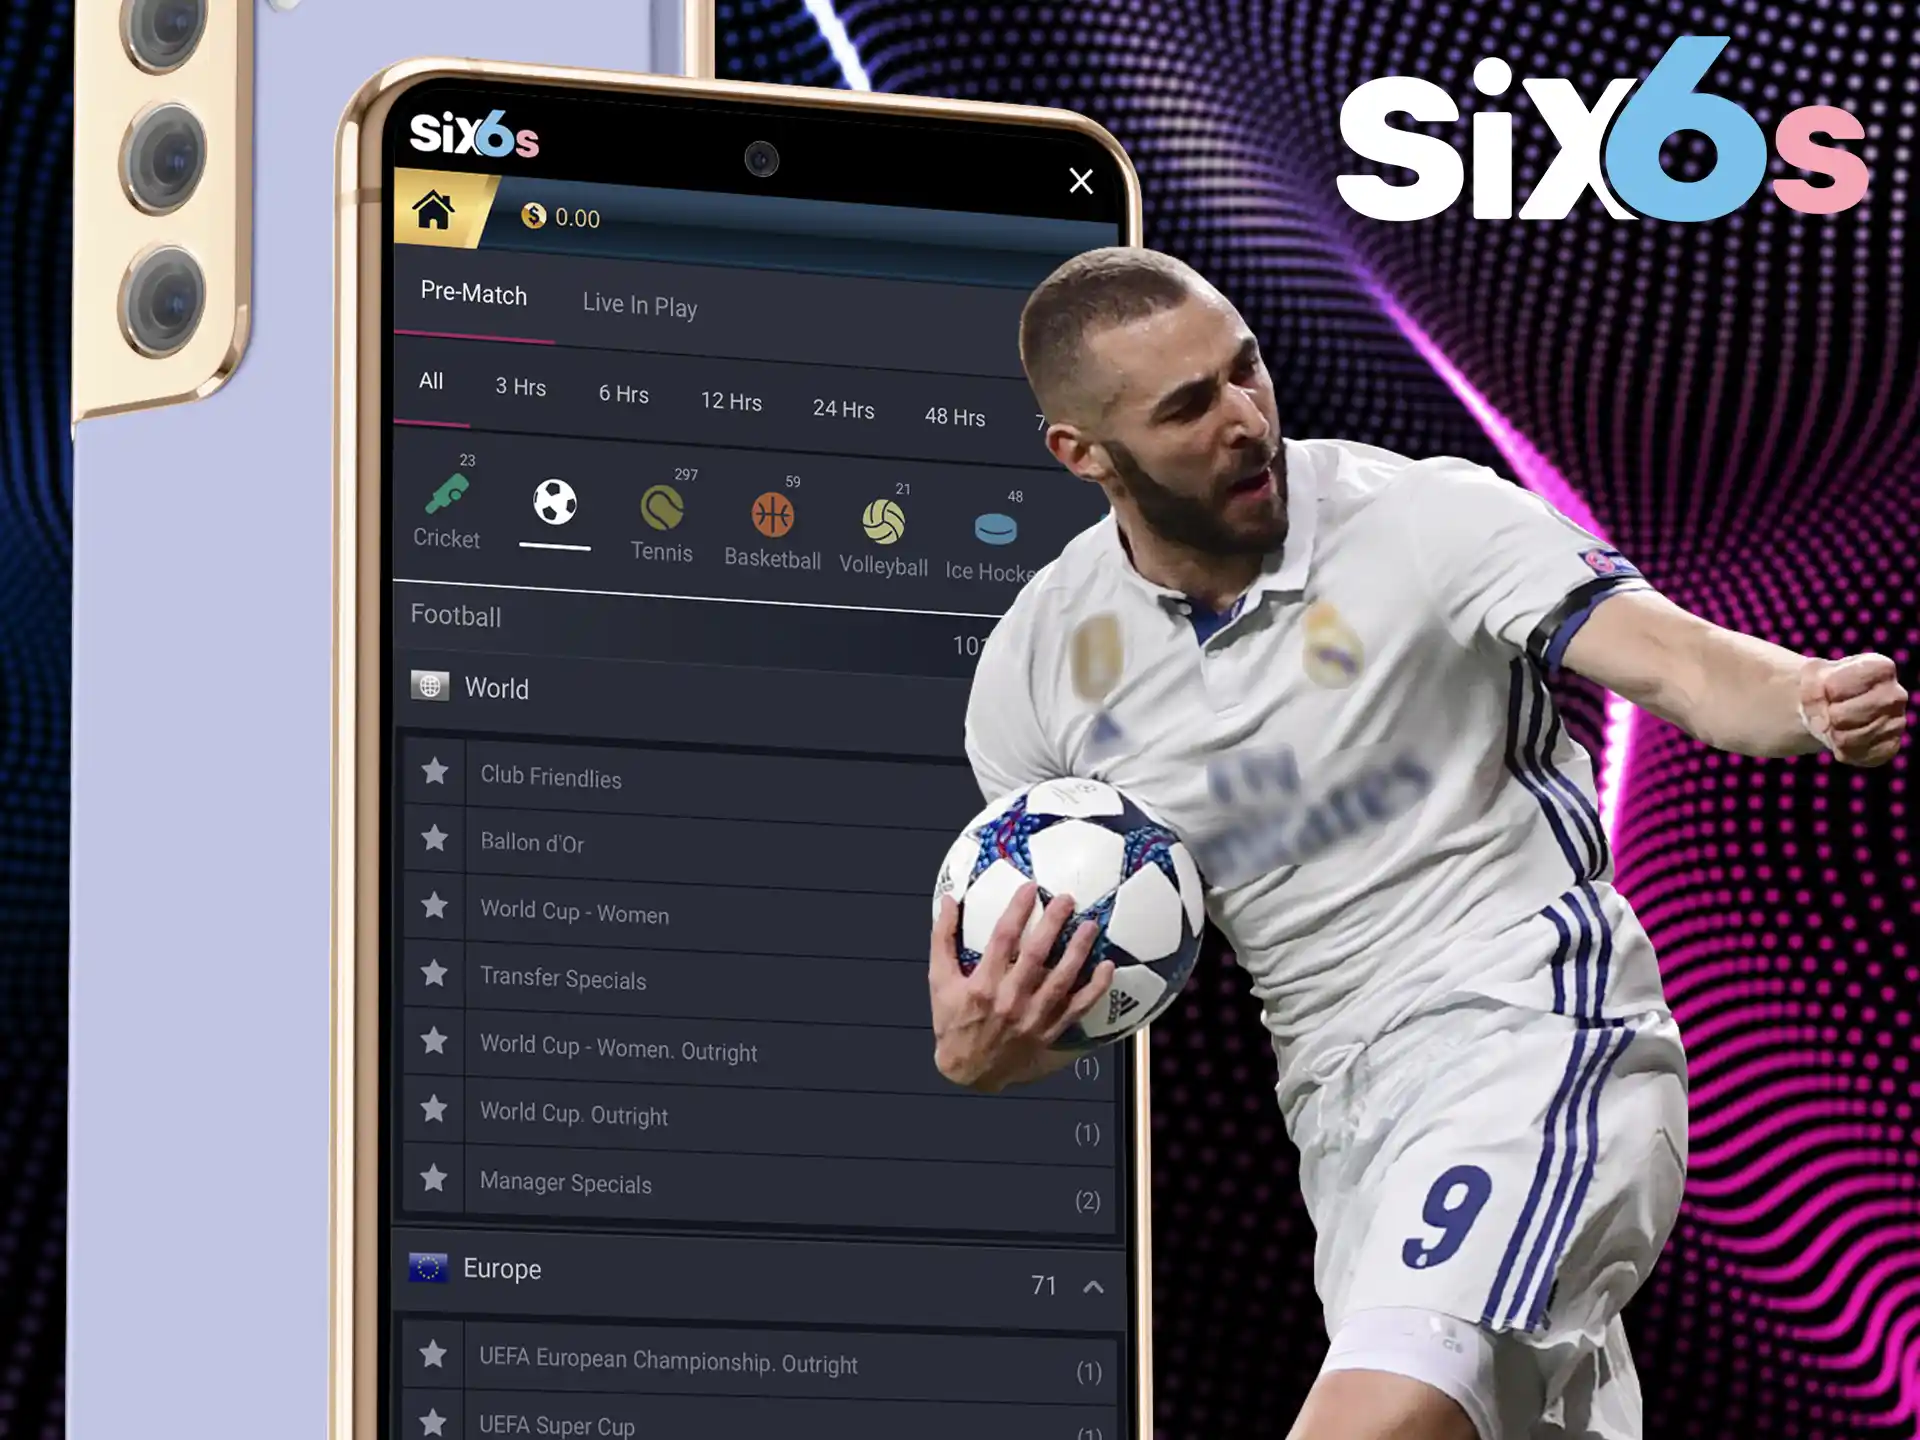 Soccer betting on the Six6s app for a multitude of tournaments.